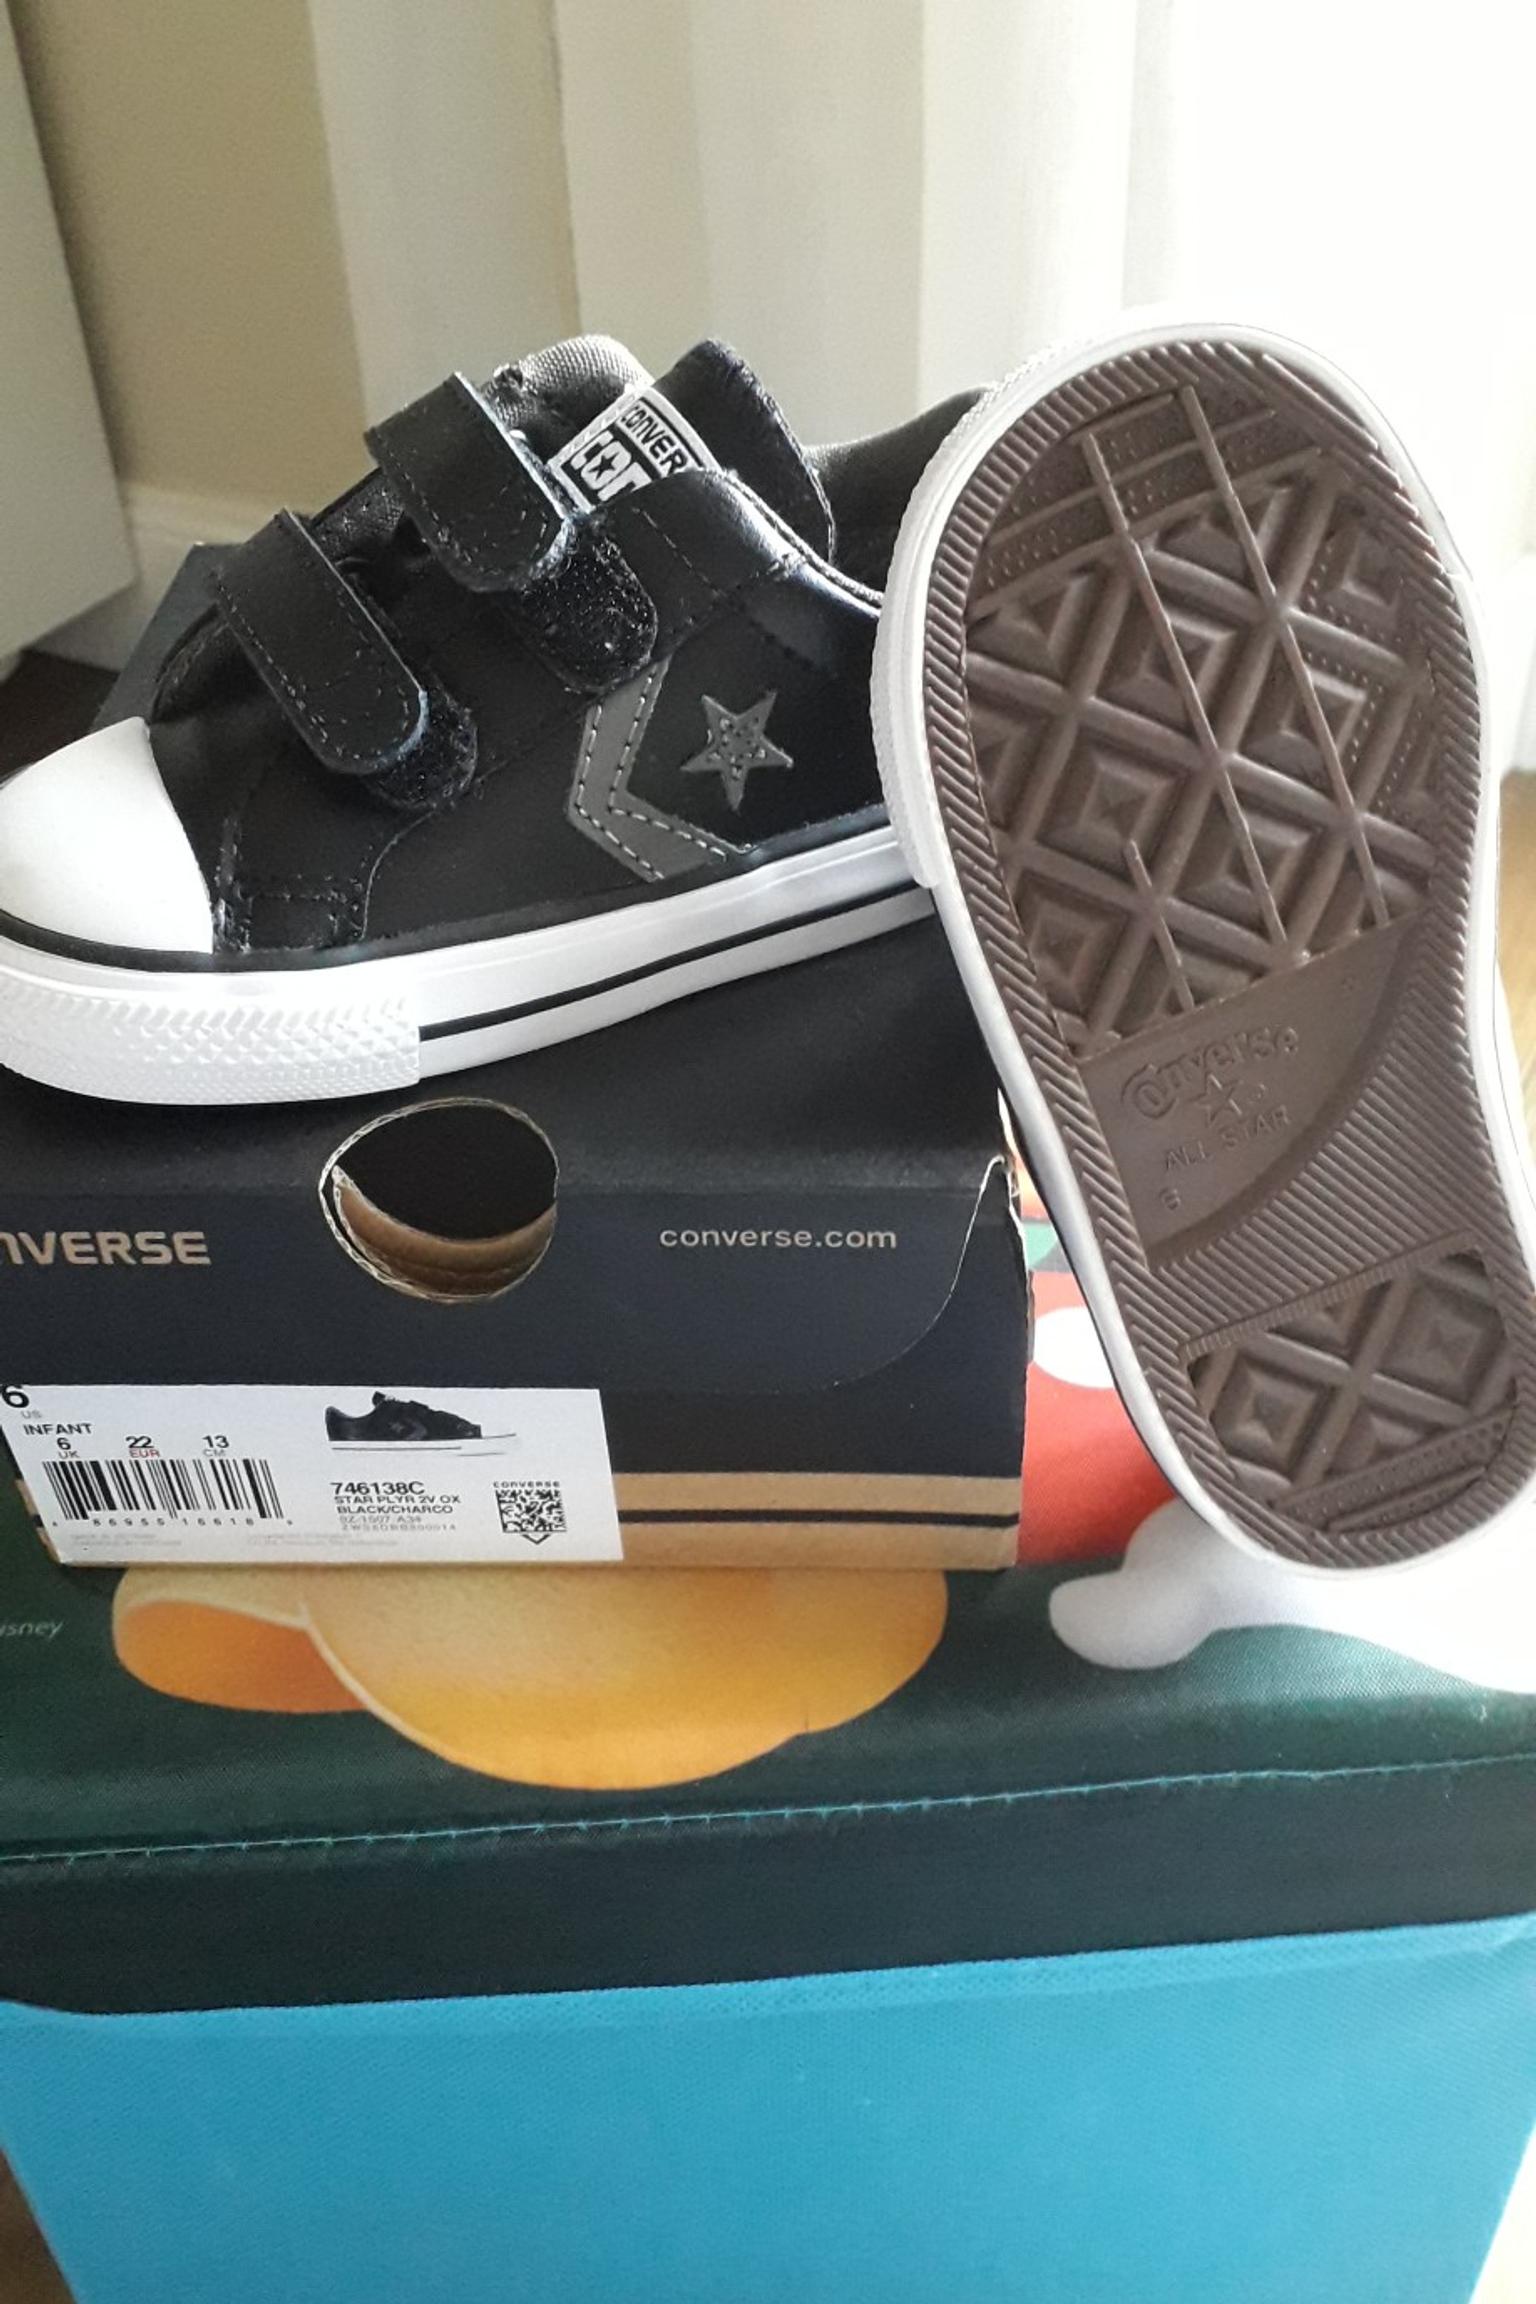 Sneakers converse bimbo nere 22 in 00148 Roma for €25.00 for sale ... الجعويني